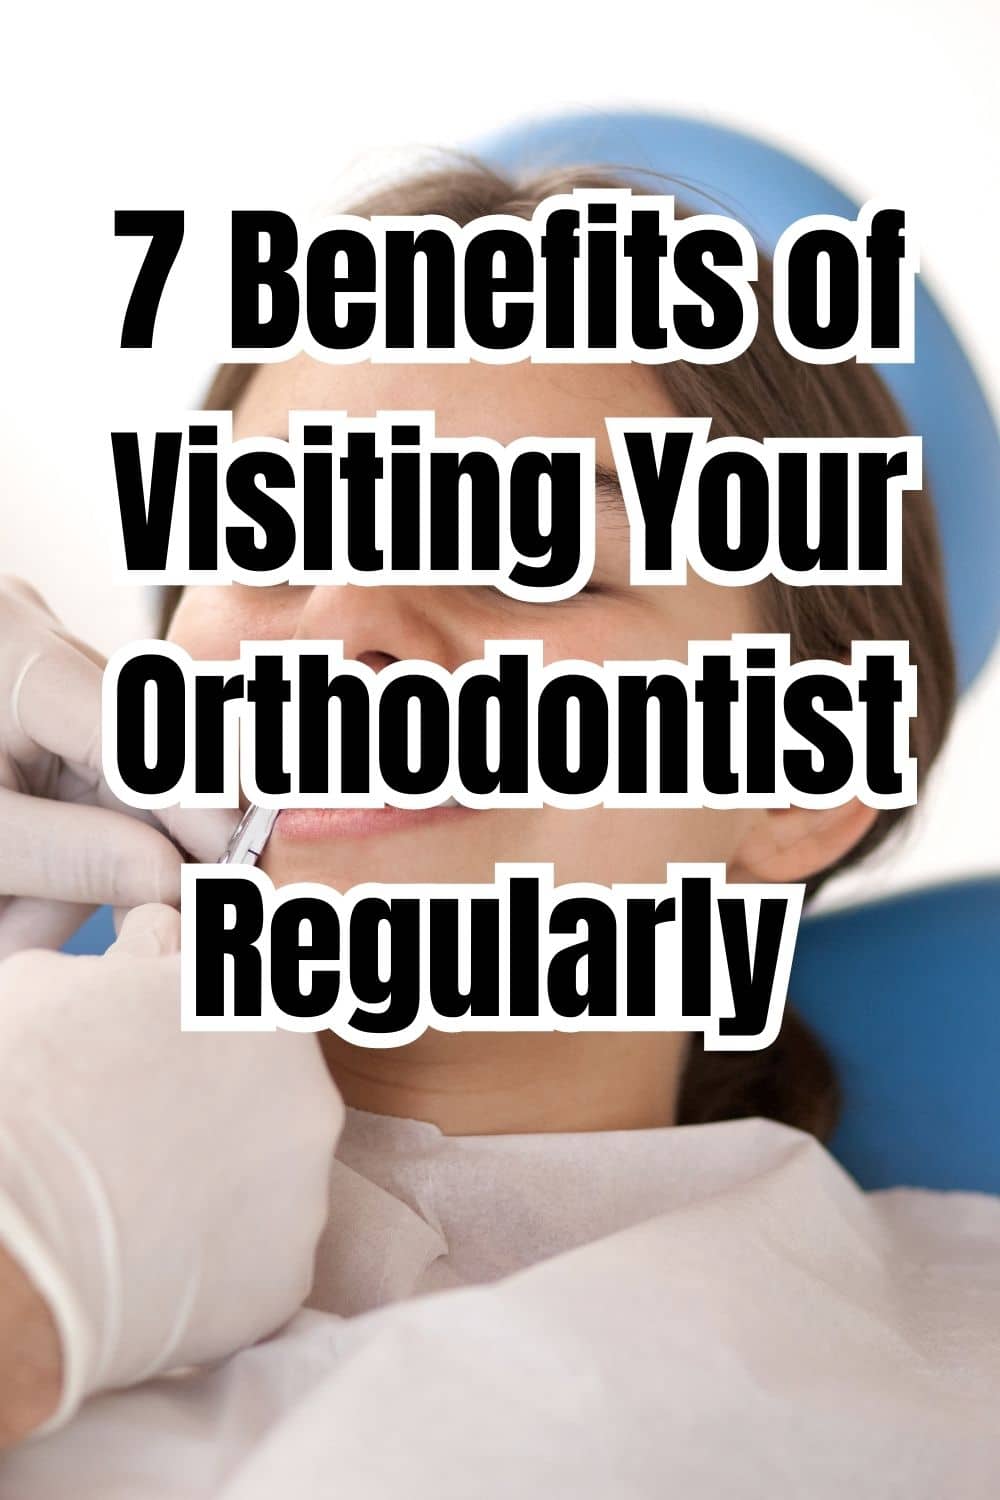 7 Benefits of Visiting Your Orthodontist Regularly